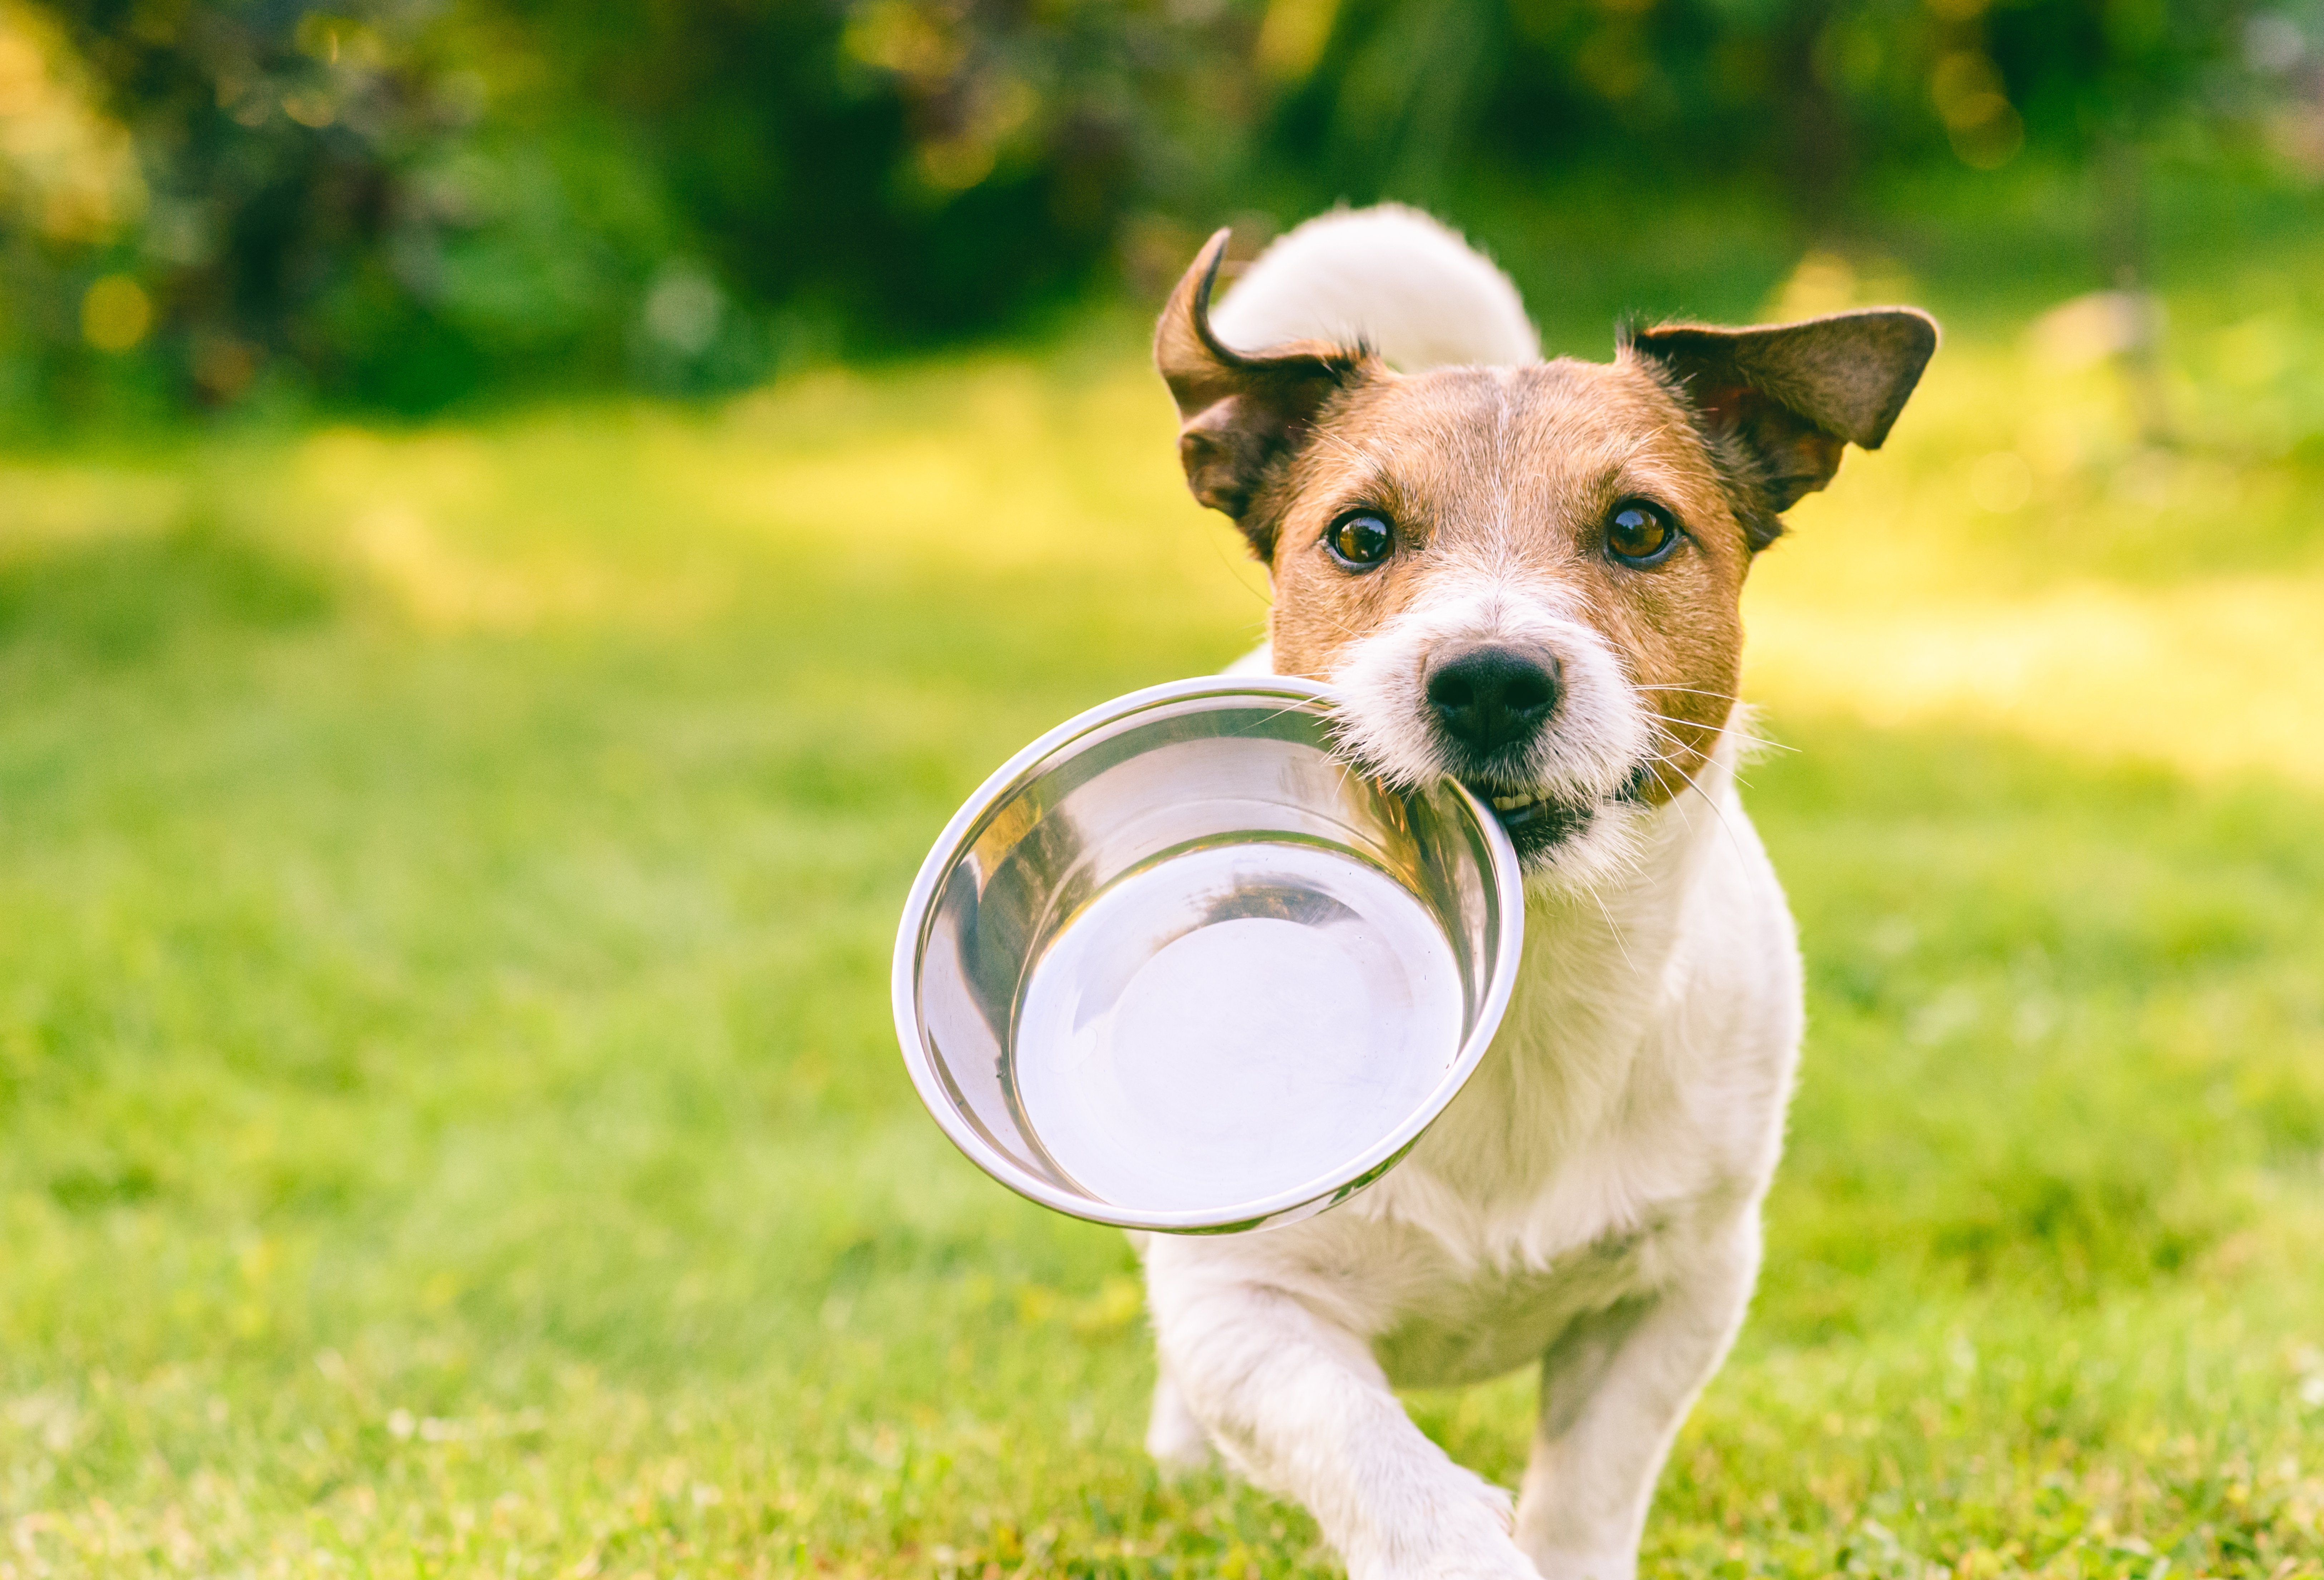 How Do You Check a Dog for Dehydration?